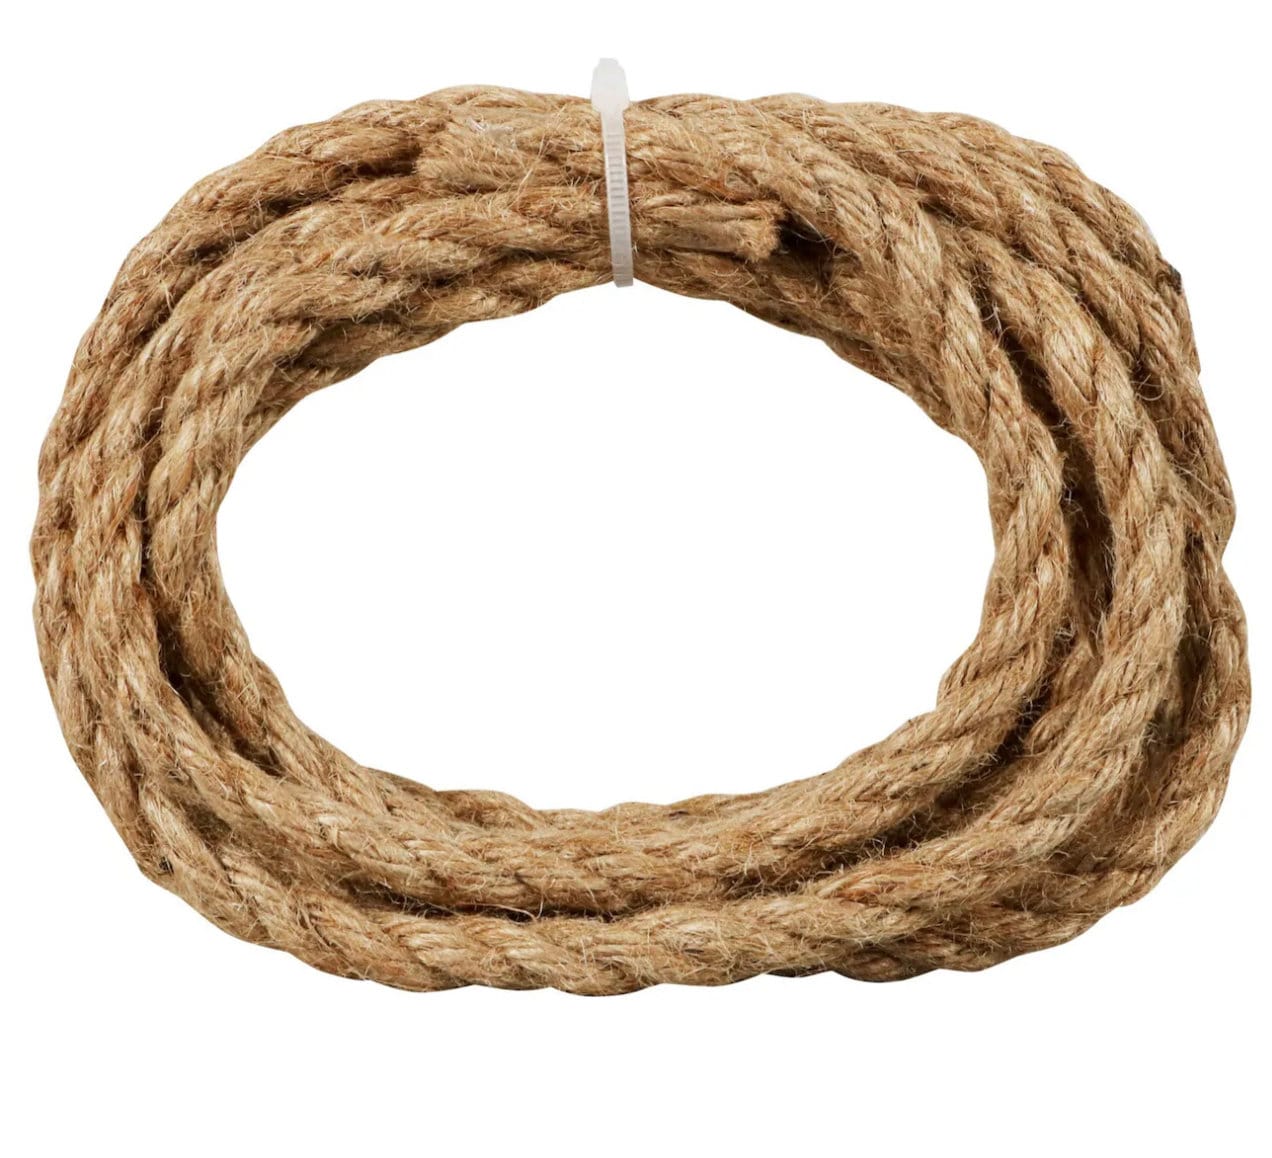 Thick Jute Hemp RopeThick Rope 15mm Natural Hemp Ropes ，Decking Jute Rope  ，4 Strand Super Strong War Garden Decoration Twine String for DIY